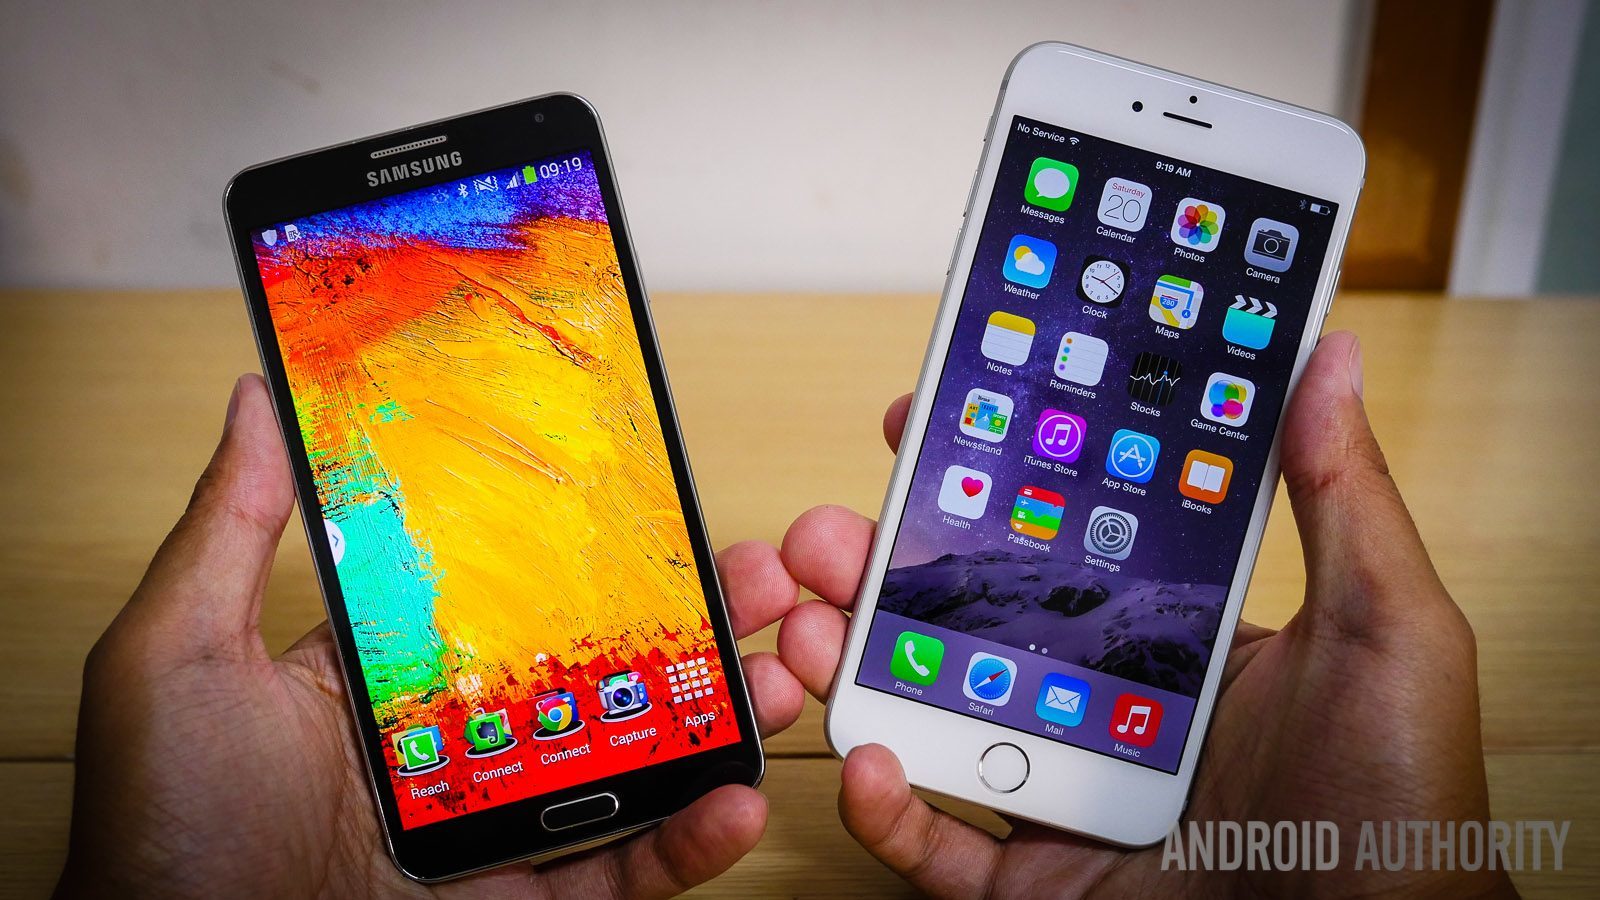 iphone 6 plus vs samsung galaxy note 3 quick look aa (13 of 20)